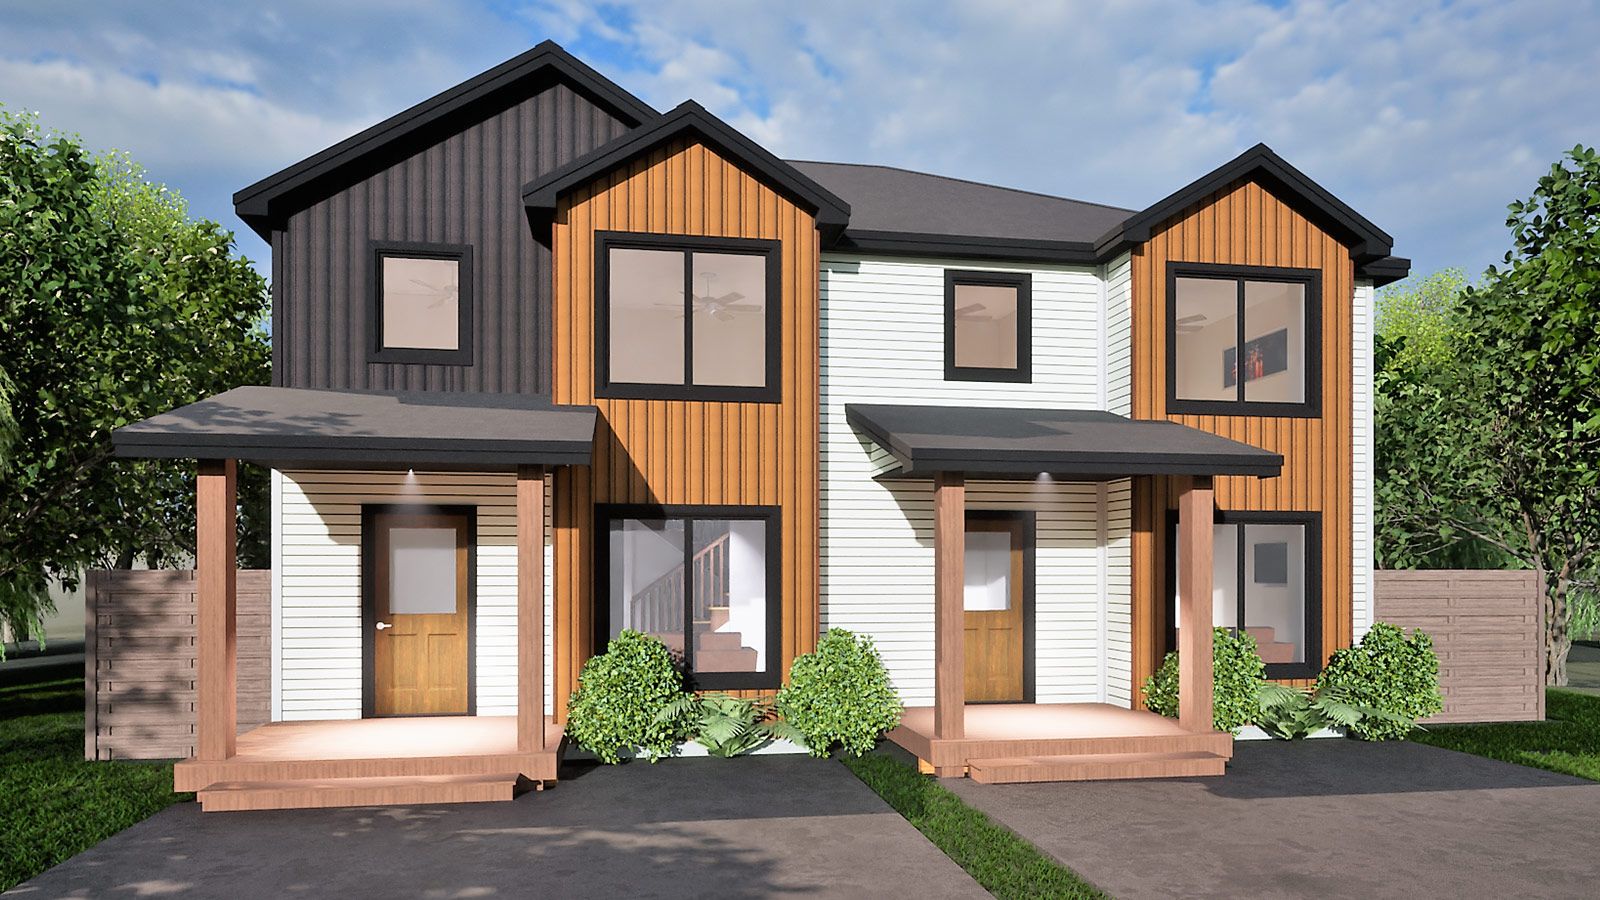 The Townhomes (Duplex)